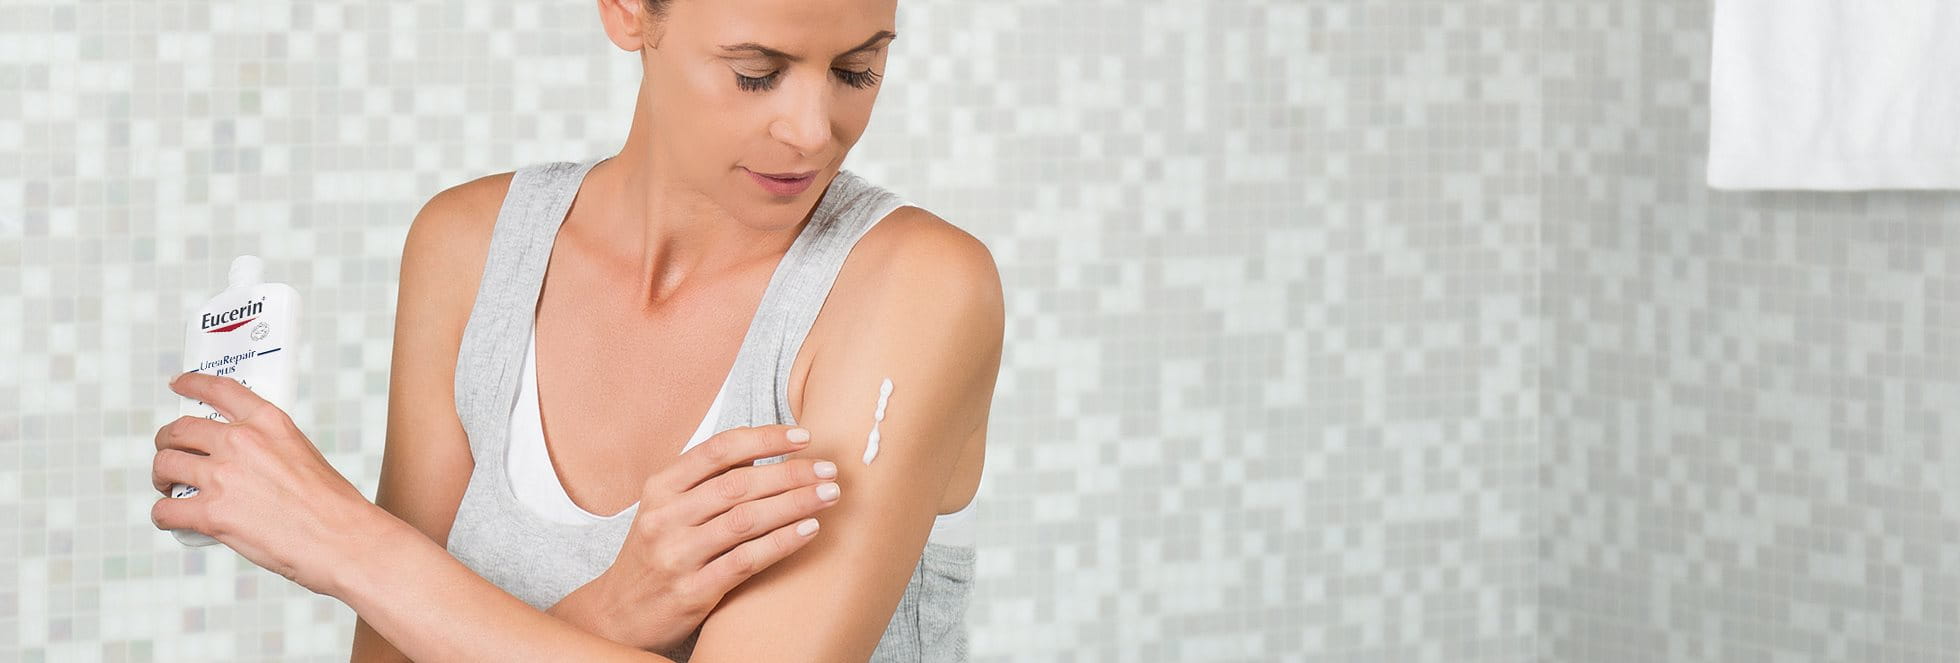 Woman applying product to her arm